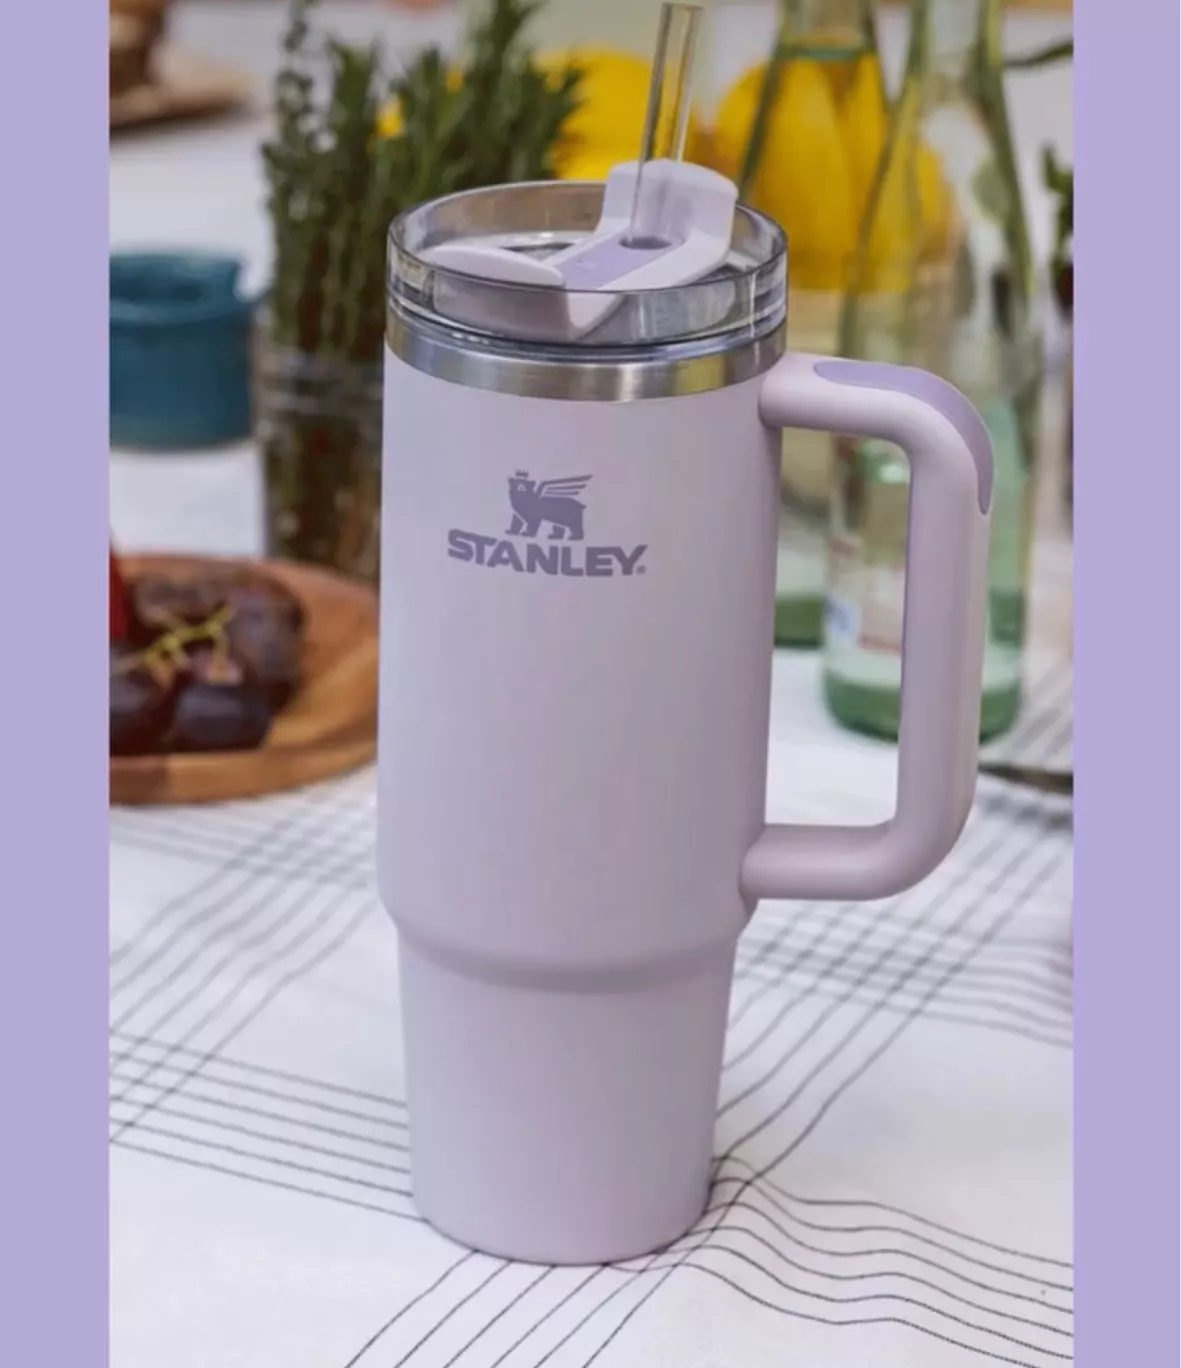 Stanley 30oz. Adventure Quencher Tumbler Back in Stock!